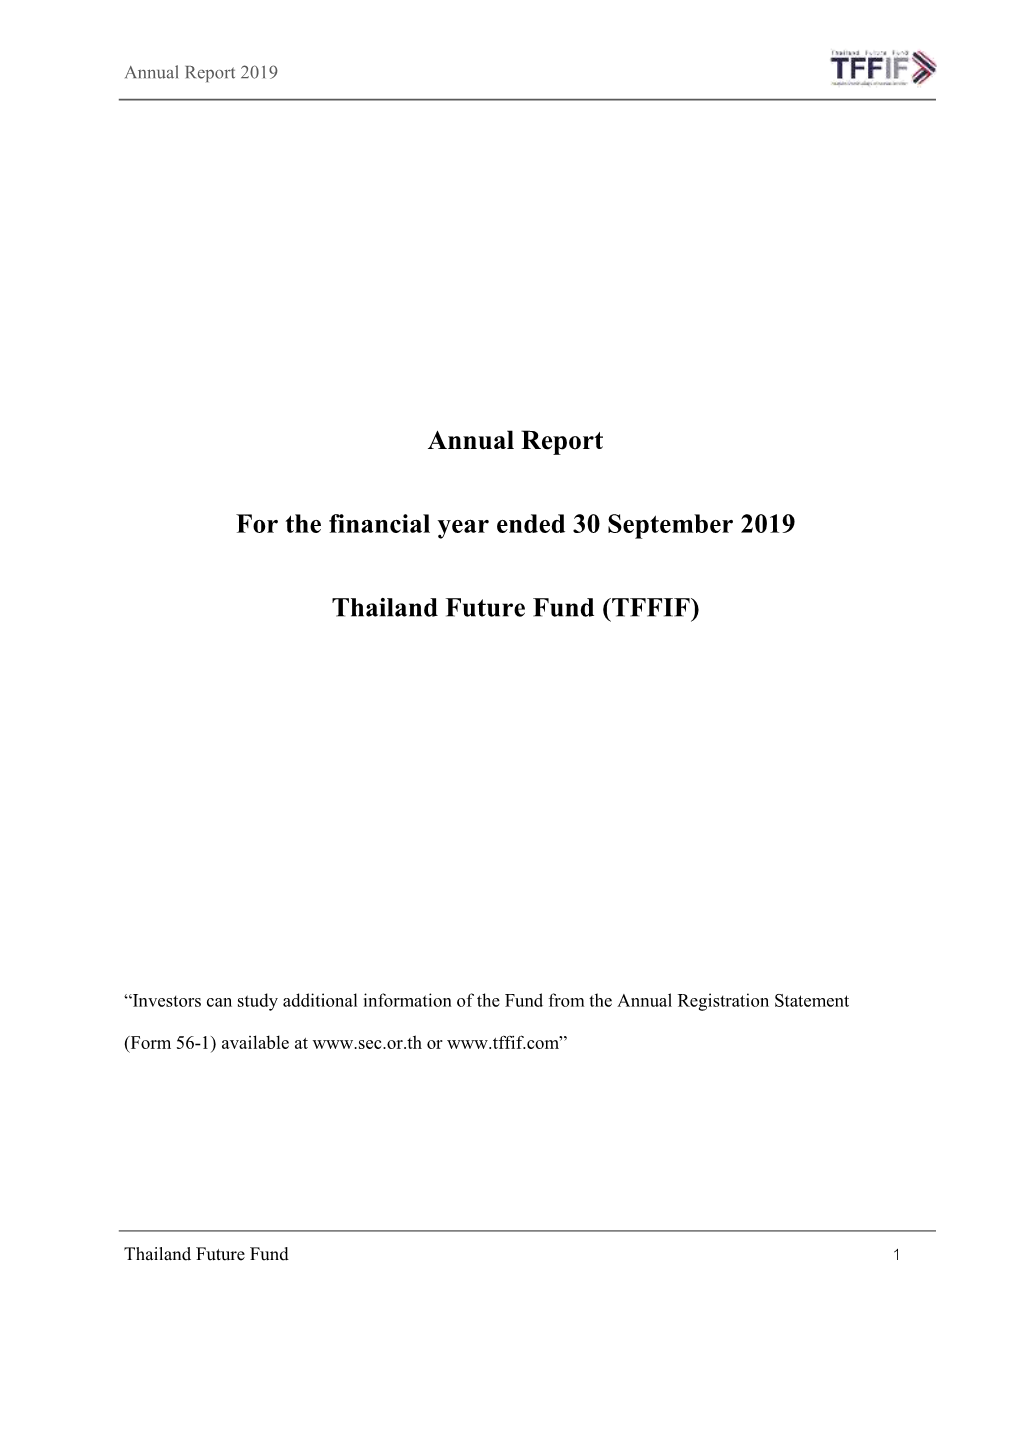 Annual Report for the Financial Year Ended 30 September 2019